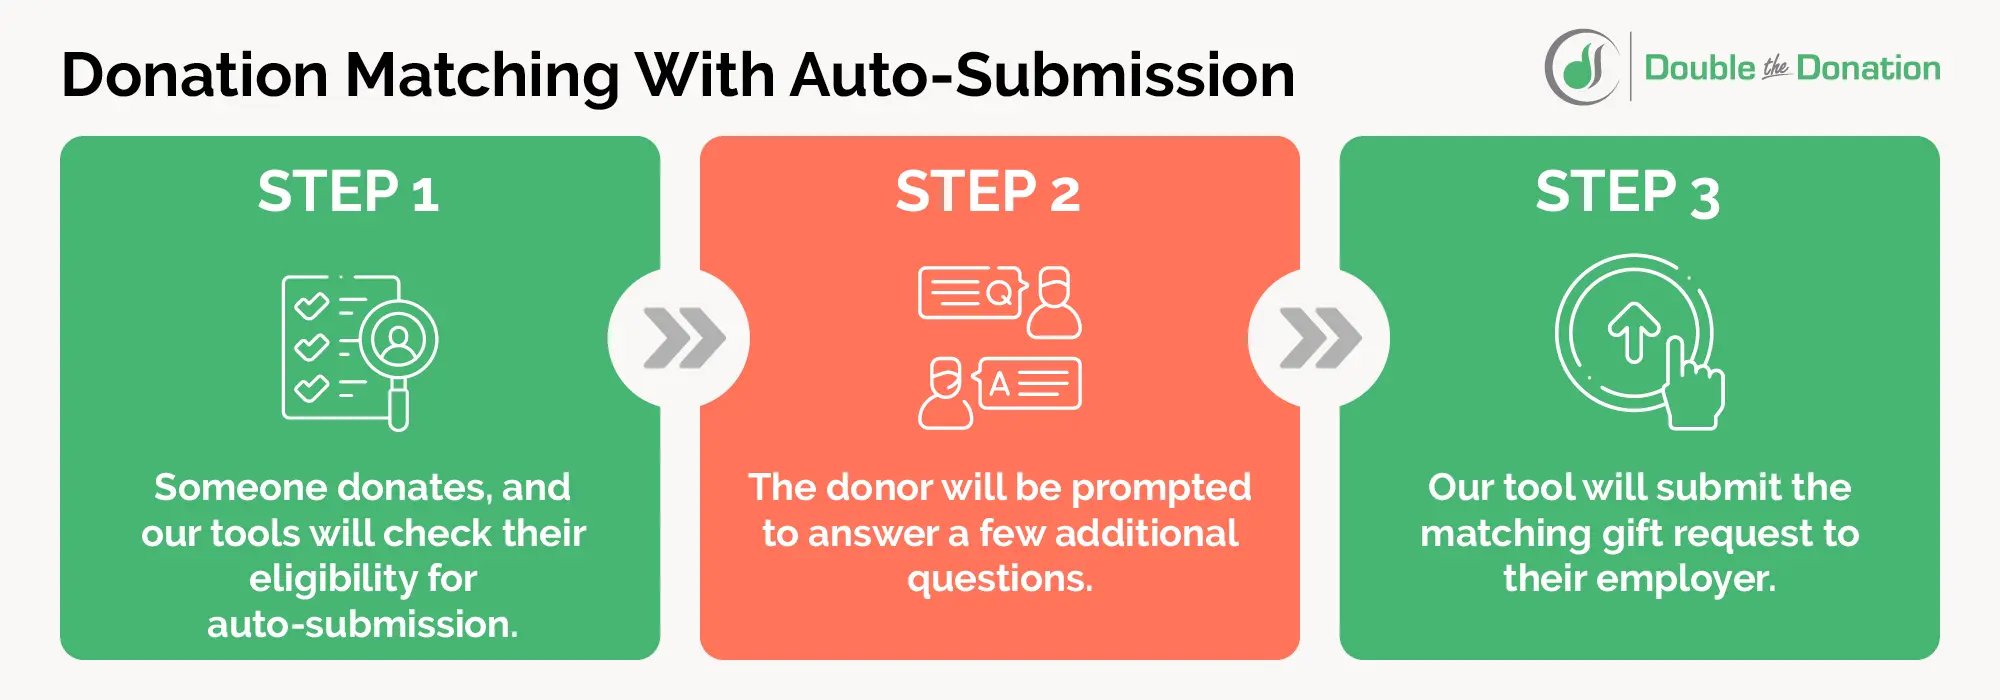 This graphic breaks down the donation matching process when using auto-submission tools.